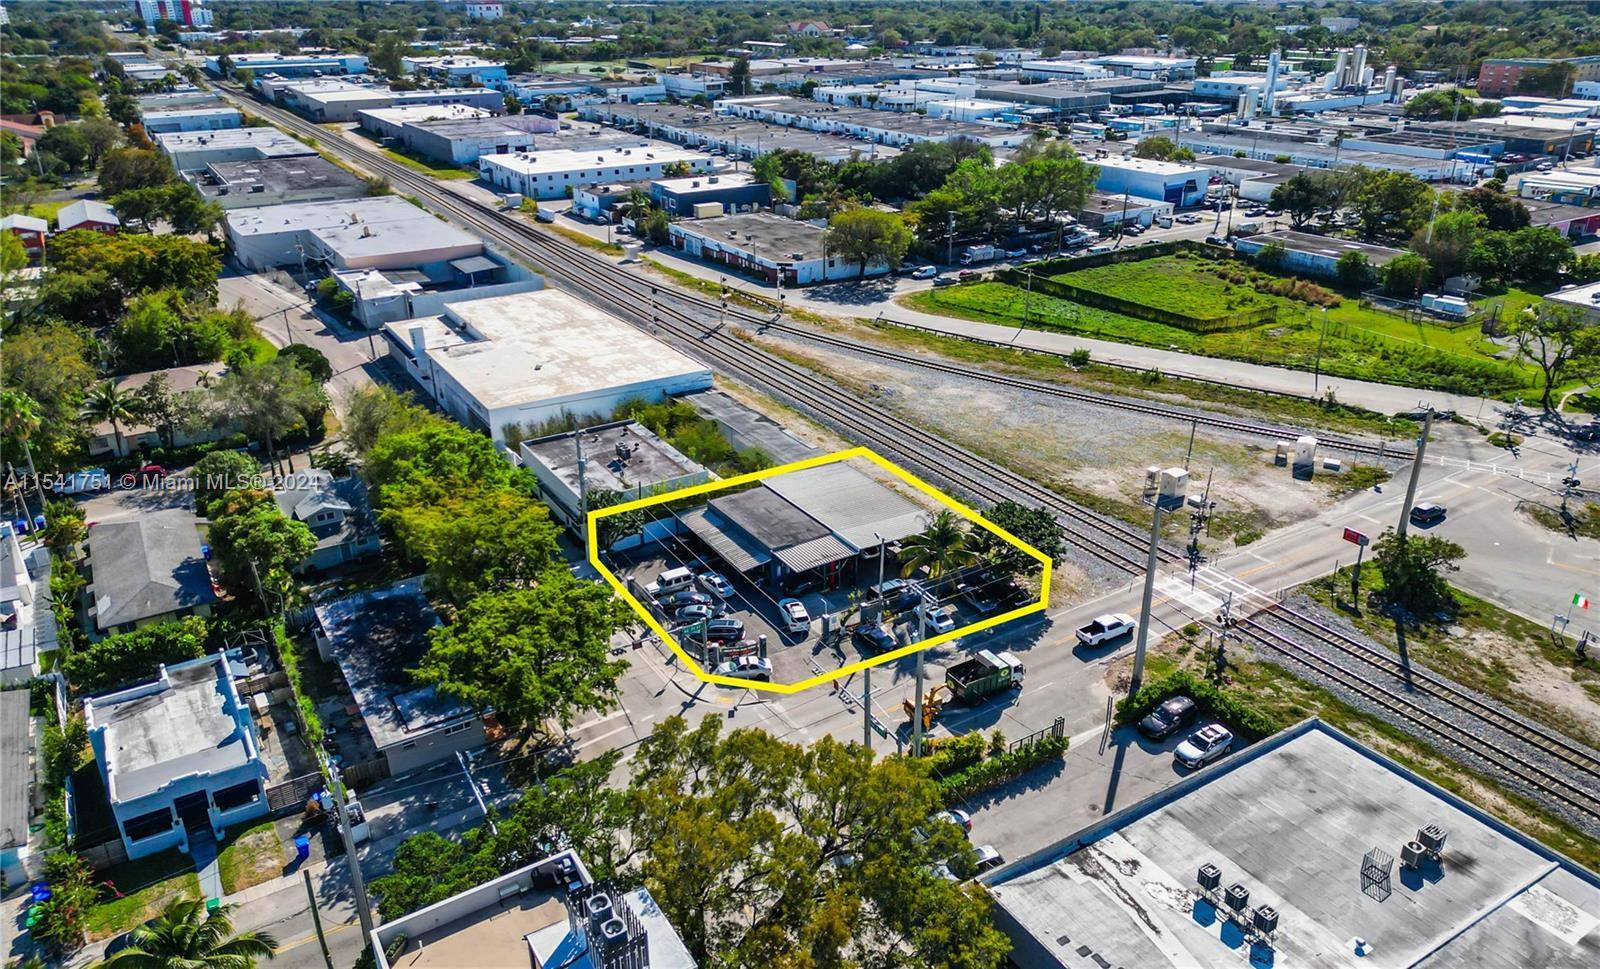 Proud to present this property, with a 1, 346 SF building on a spacious 7, 900 SF lot, is tailor made for automotive enterprises as well as many other uses.